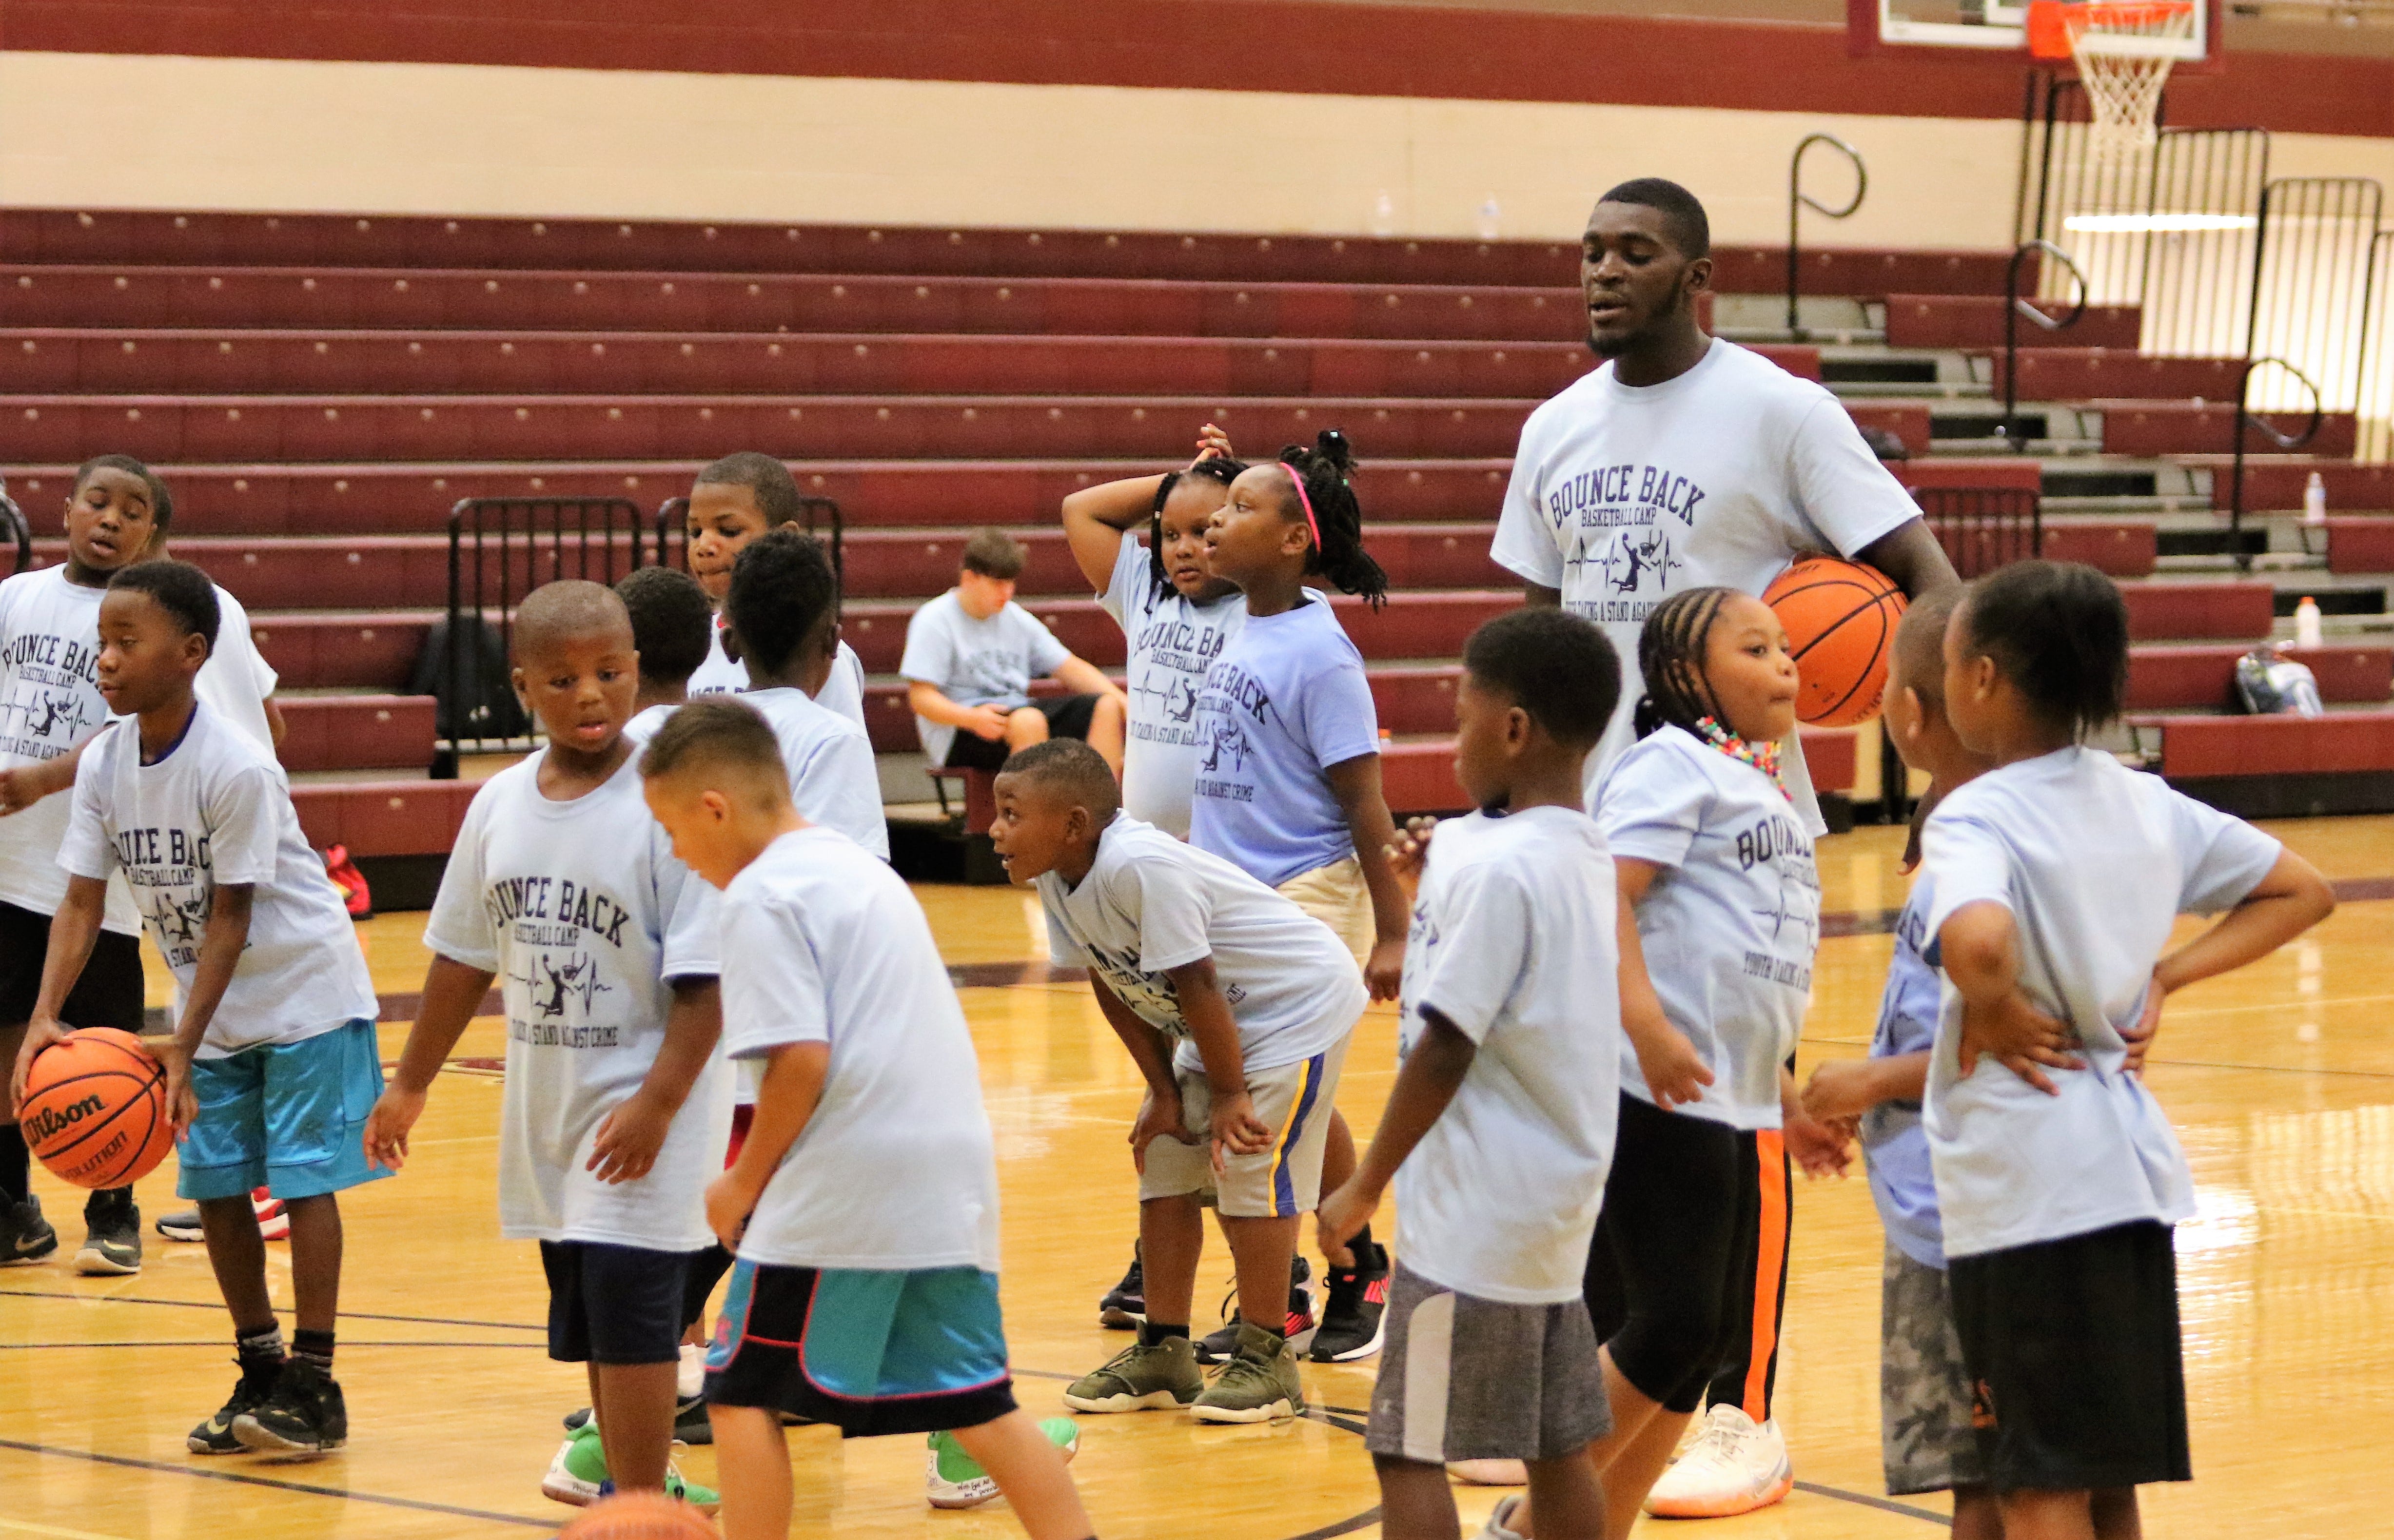 Bounce Back Camp Liberty: Jackson youngsters hone hoops